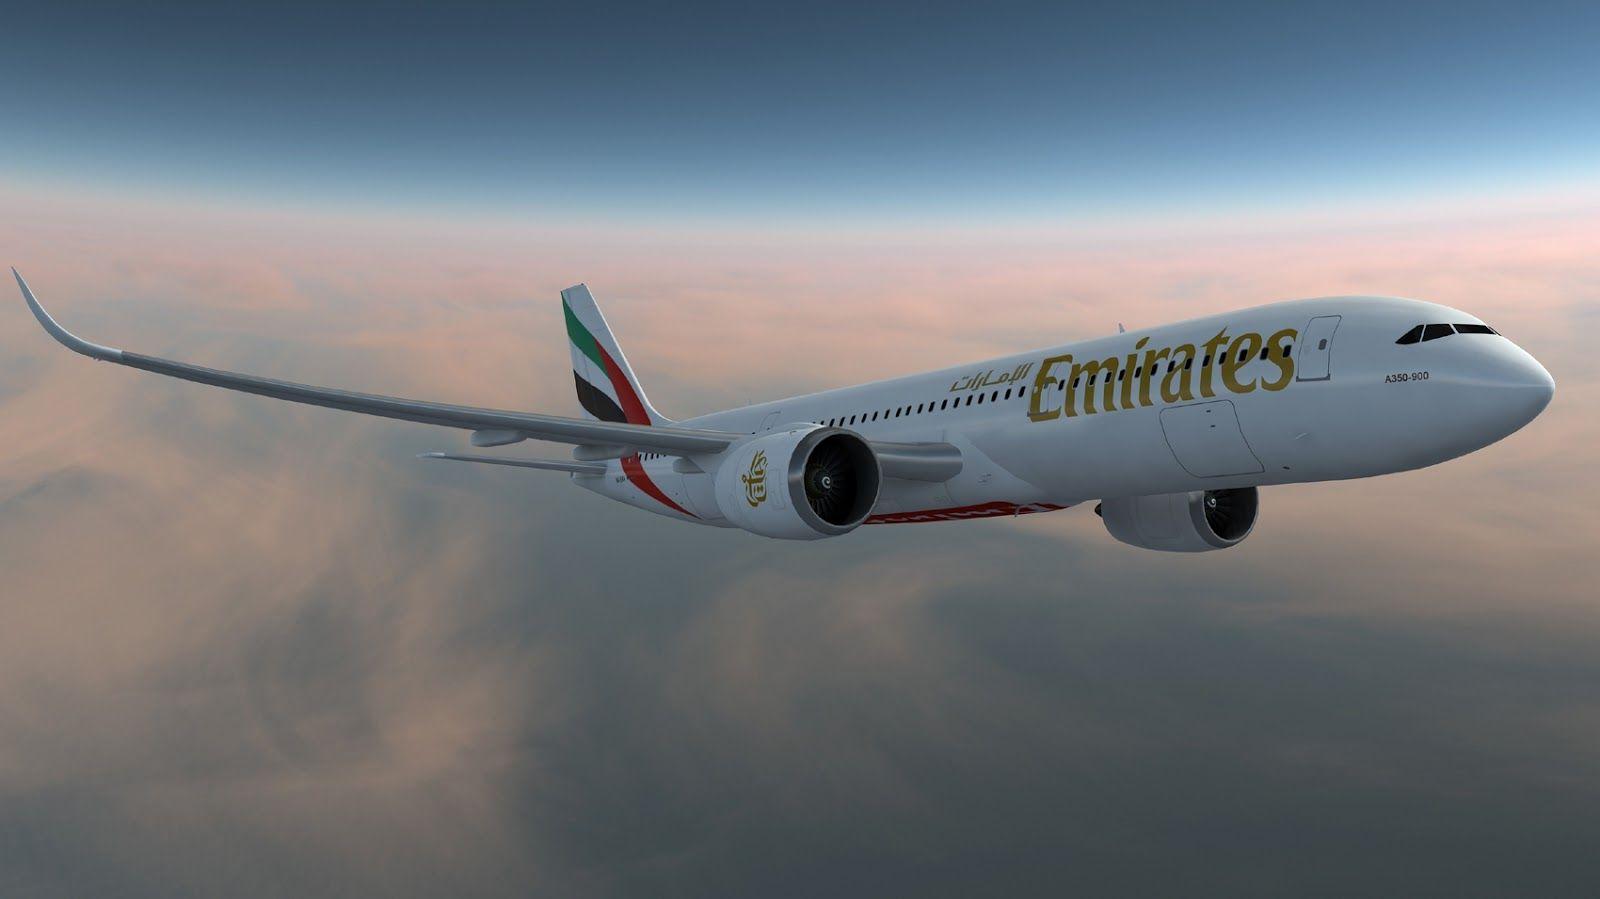 Airbus A350 900 Rendering Image Of Emirates Airlines Aircraft